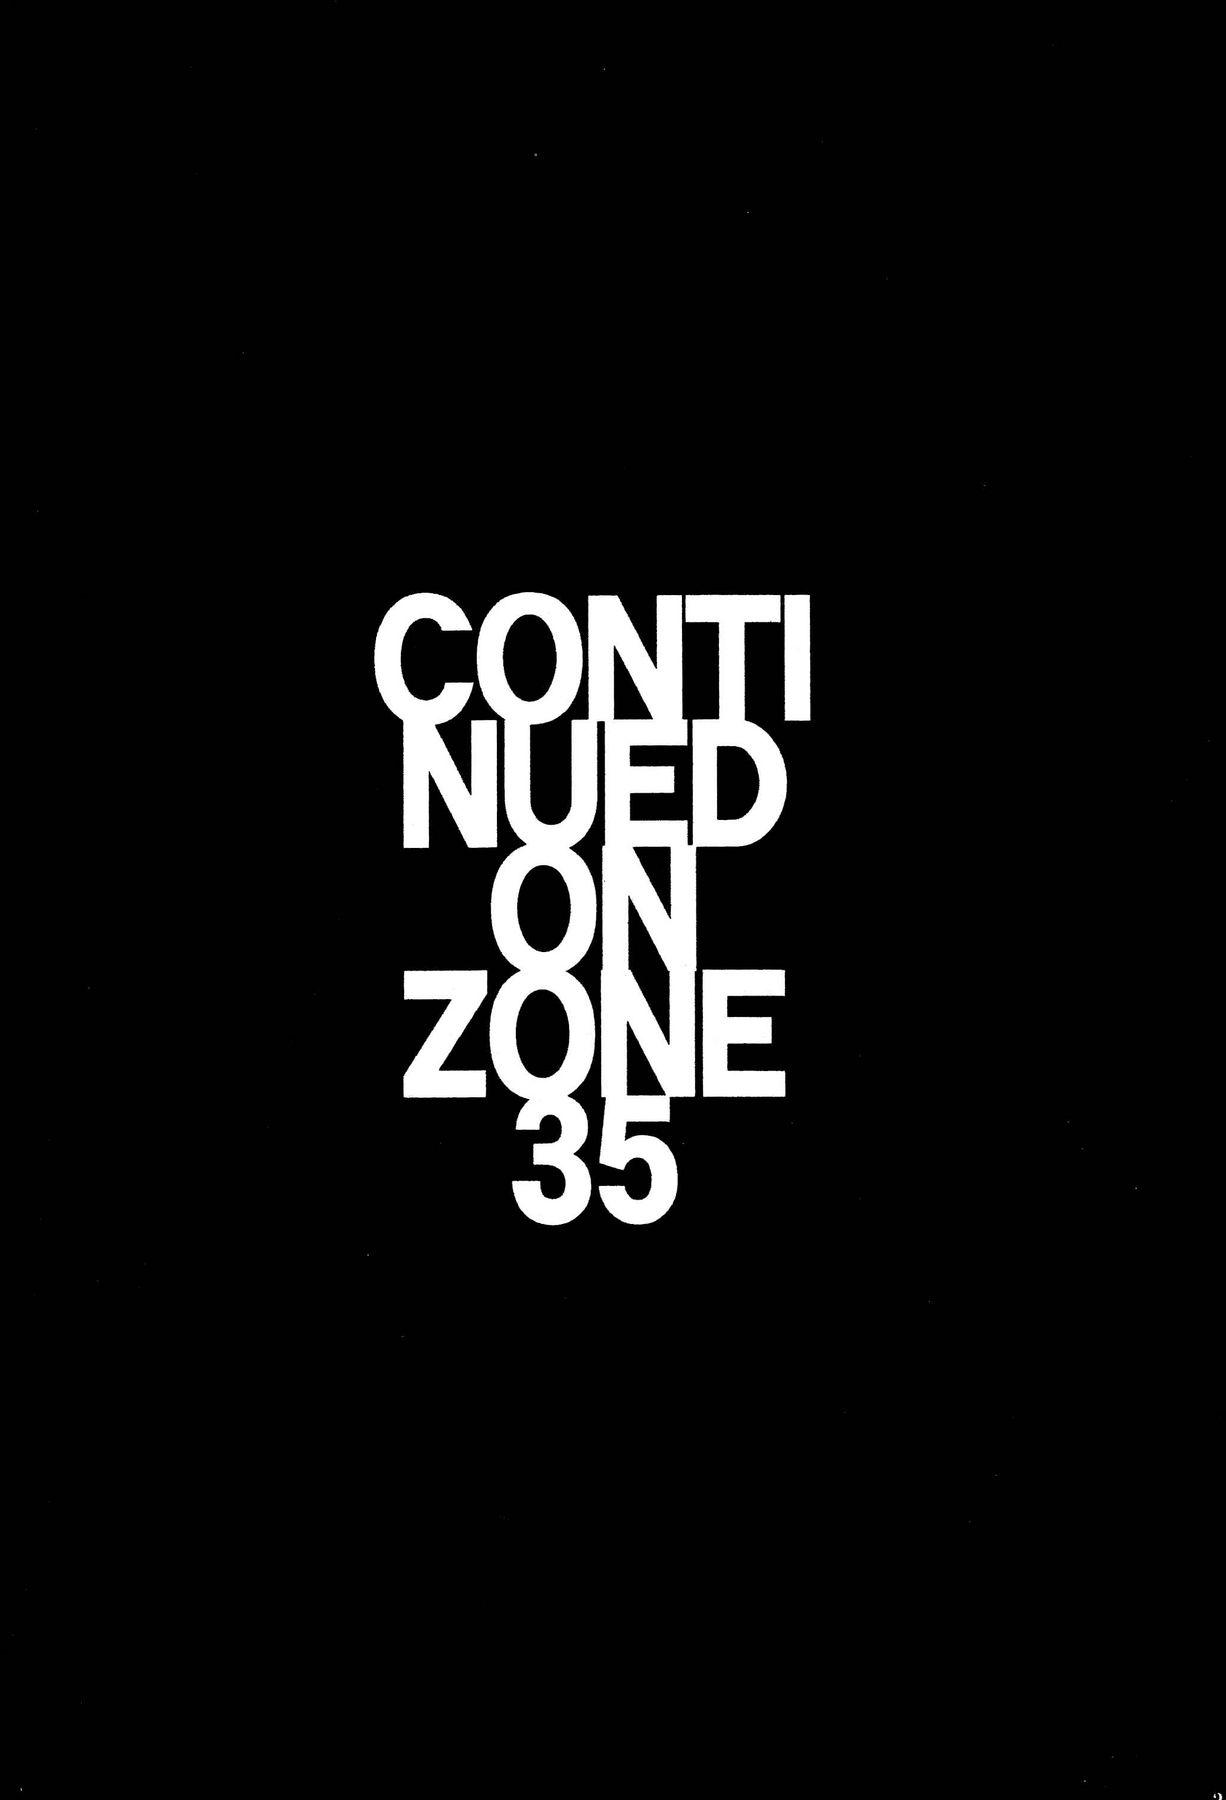 ZONE 34 WILL THE MAKE DO WITH BY YOU 33